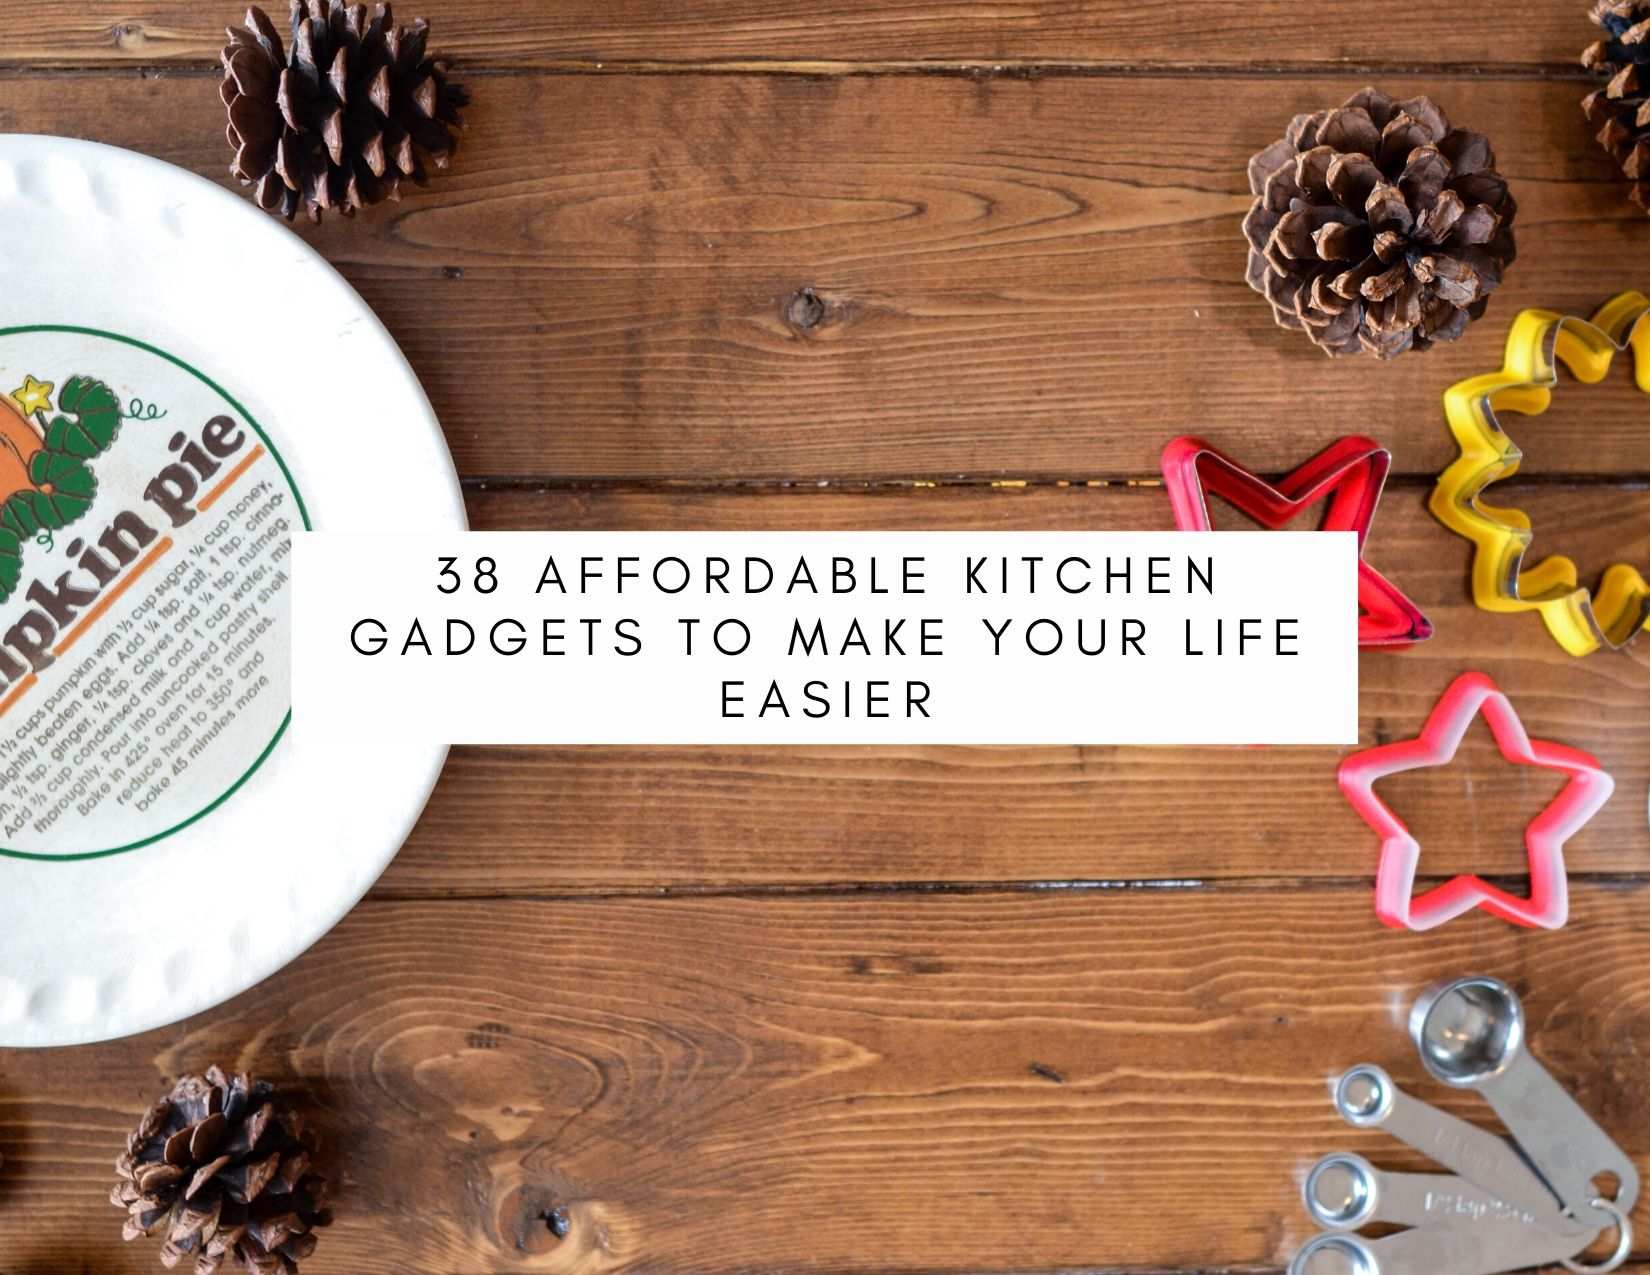 Making Life Easier with our Gadgets 